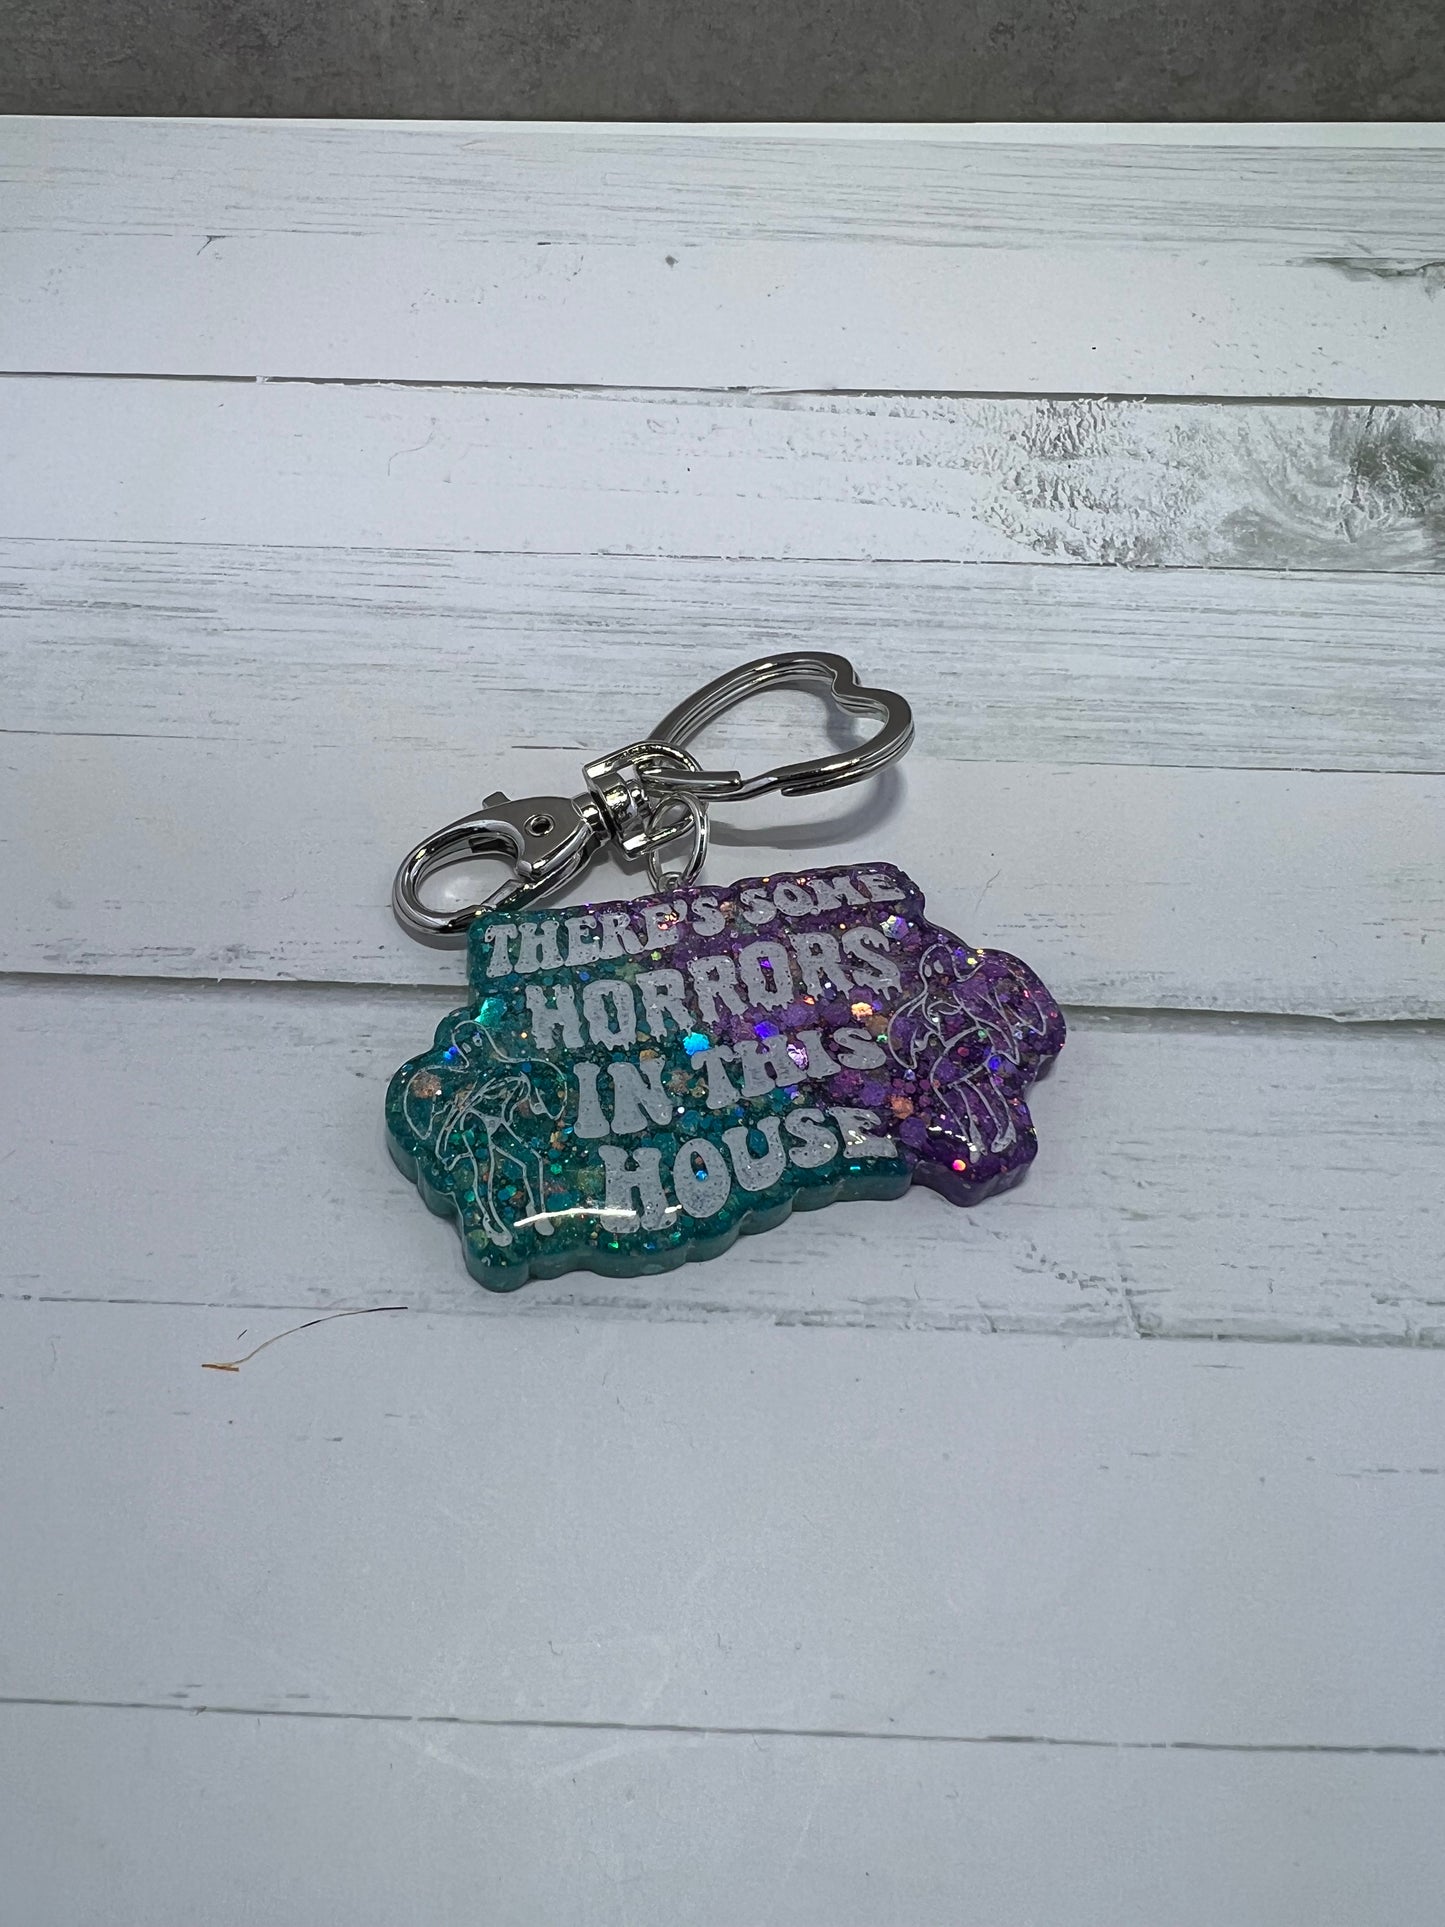 Horrors in This House Keychain